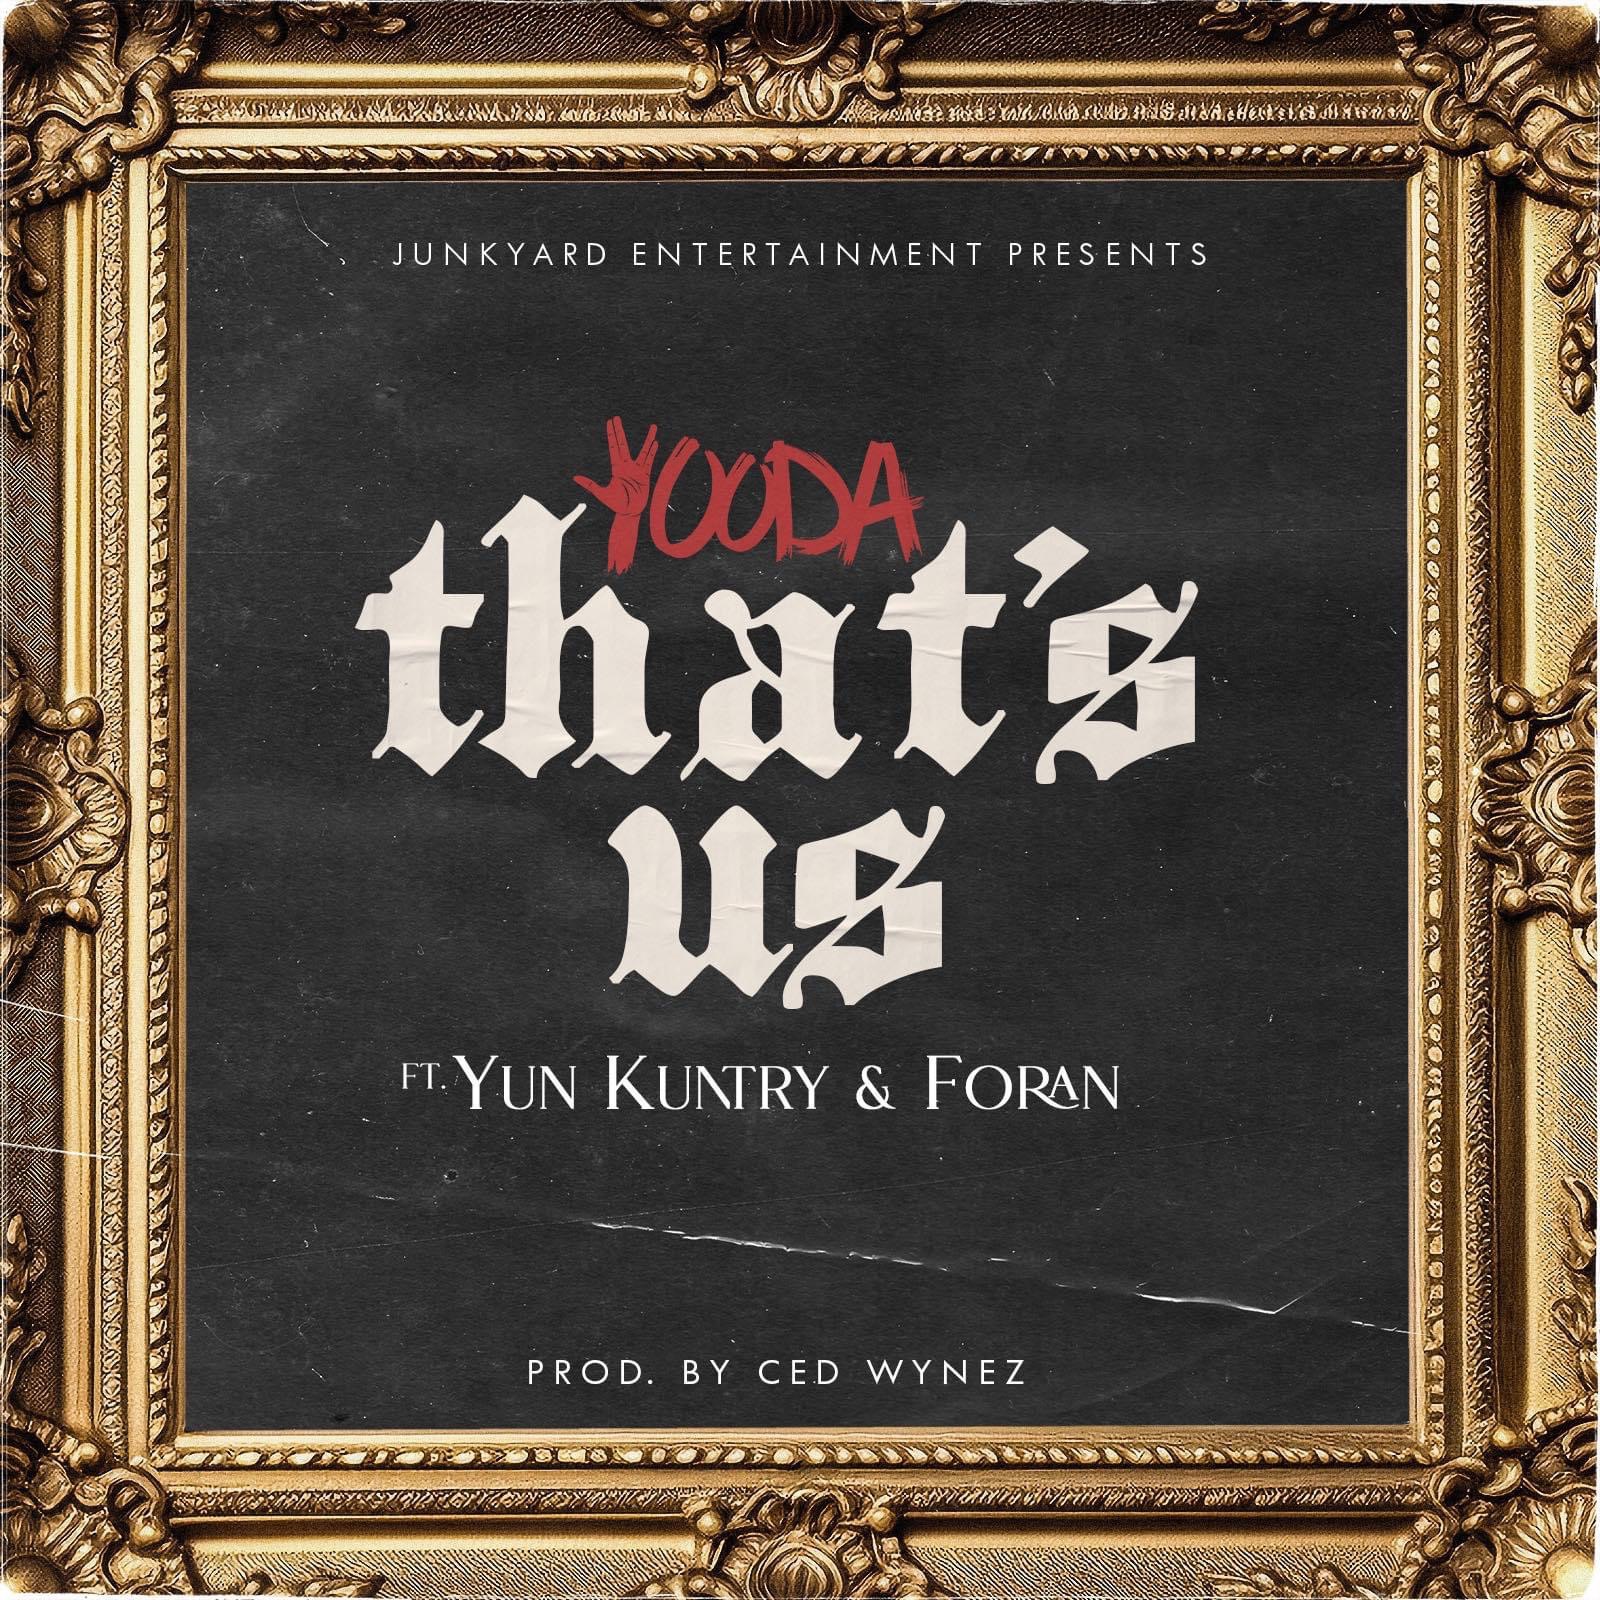 Yooda releases That’s Us featuring Yun Kuntry & Foran